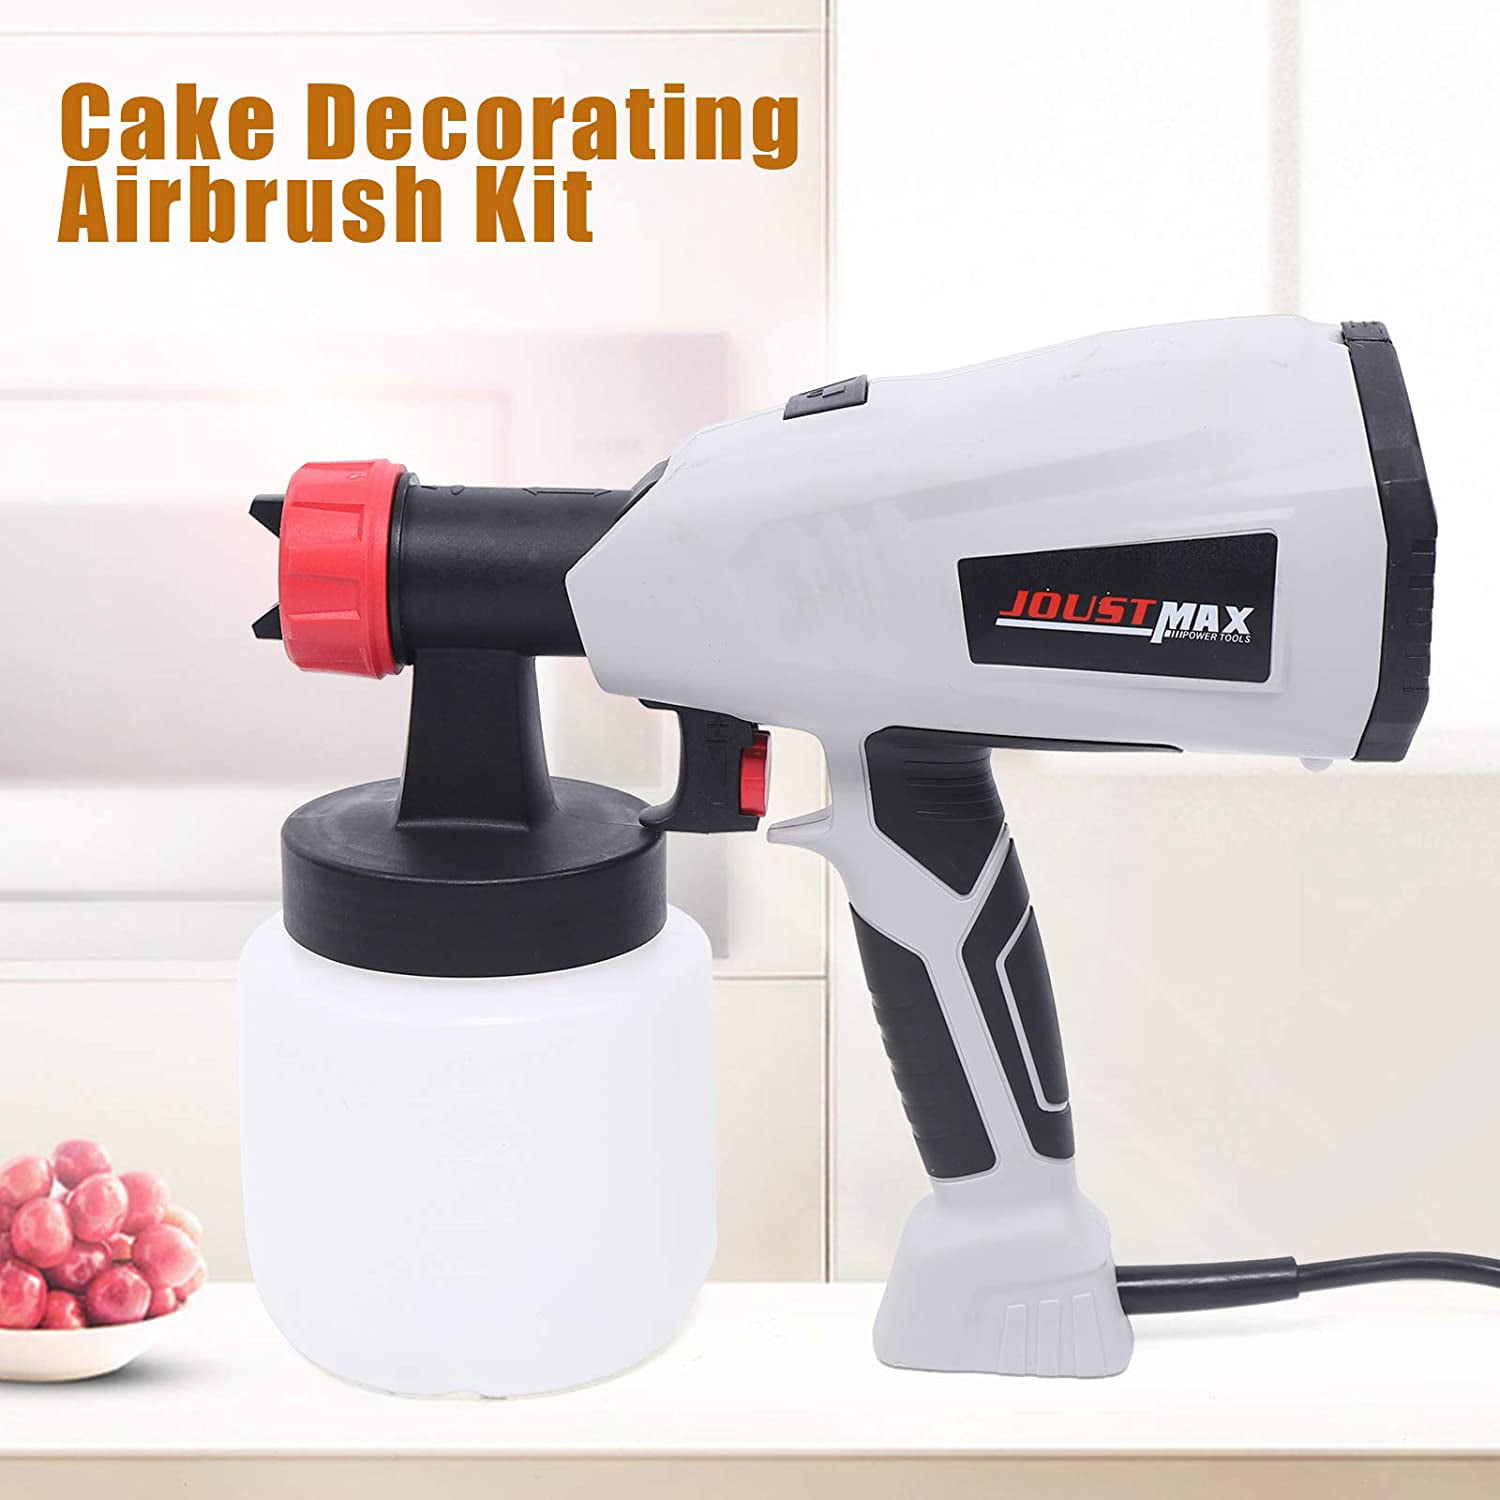 CAKE DECORATING ACCESSORIES IN LAGOS on Instagram: AIRBRUSH GUN ONLY.  PLEASE NOTE THIS IS NOT THE MACHINE THIS IS JUST THE GUN. YOU NEED TO HAVE  THE MACHINE TO USE THIS GUN.